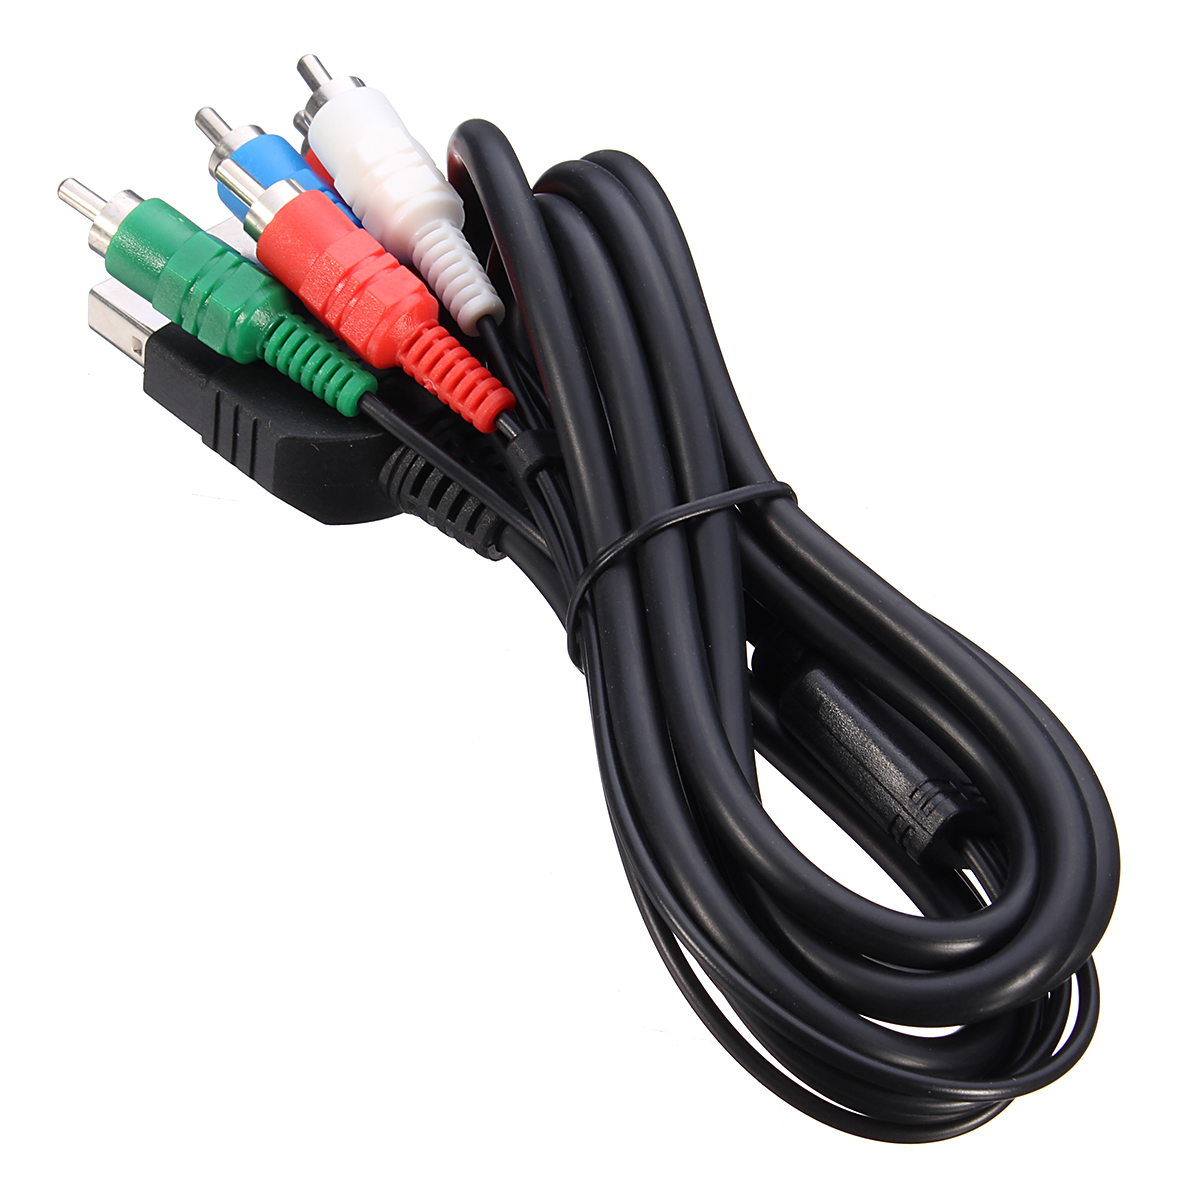 HD TV Component Composite 5 RCA AC Stereo Sound Audio Video Cable Cord for XBOX 11